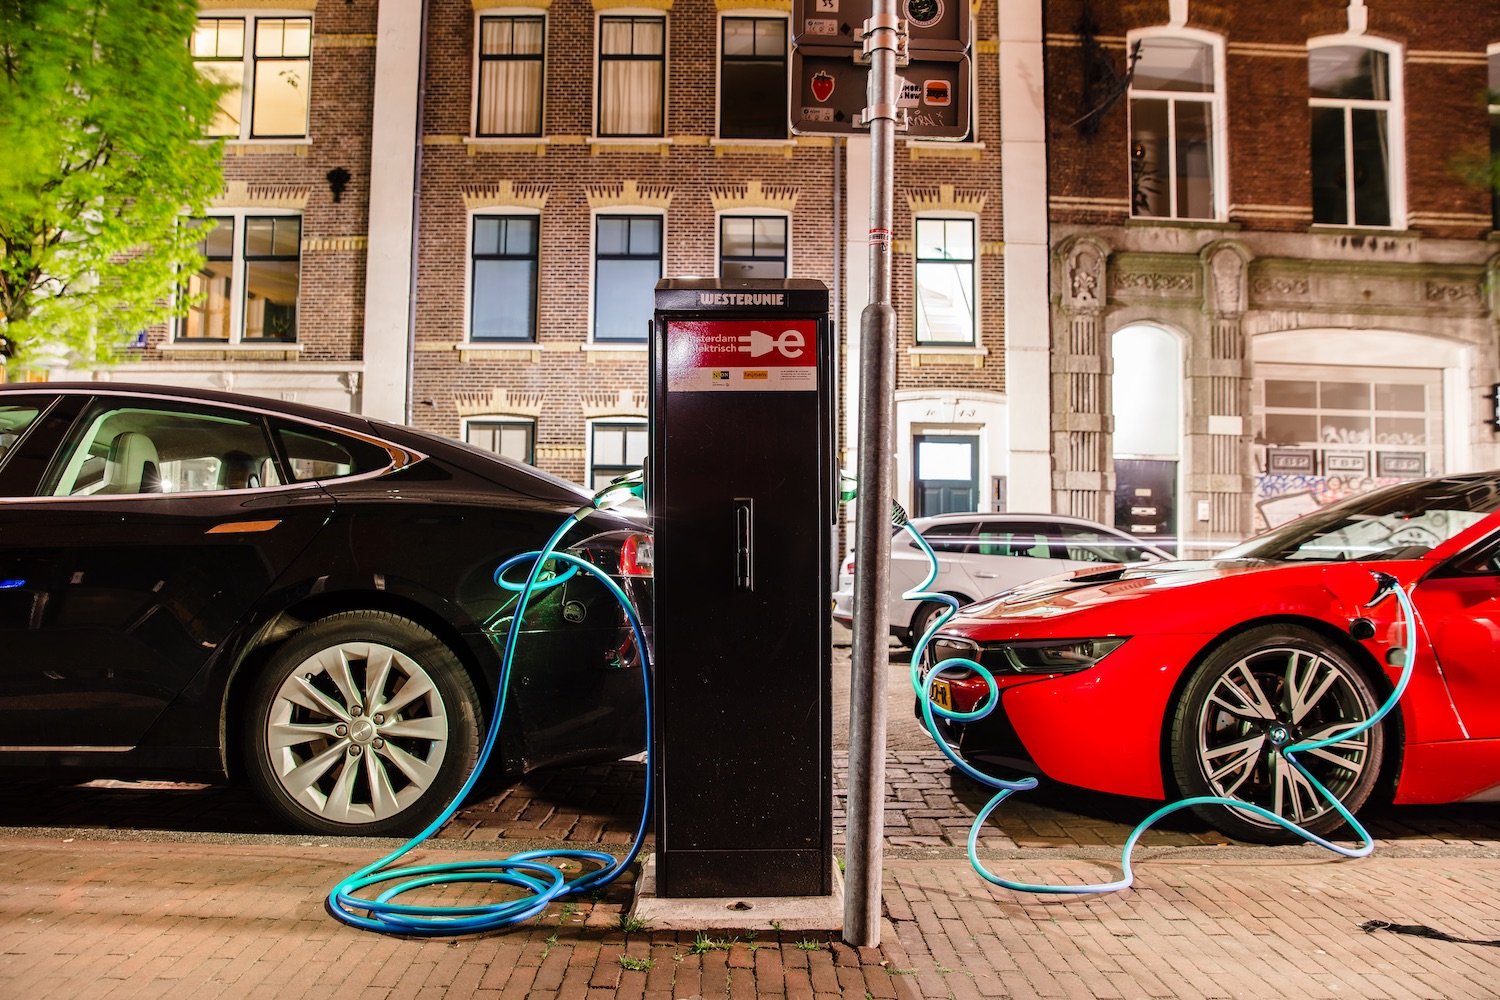 17_FLATANGLE_AMSTERDAM_PARKED CAR_CHARGING STATION_4